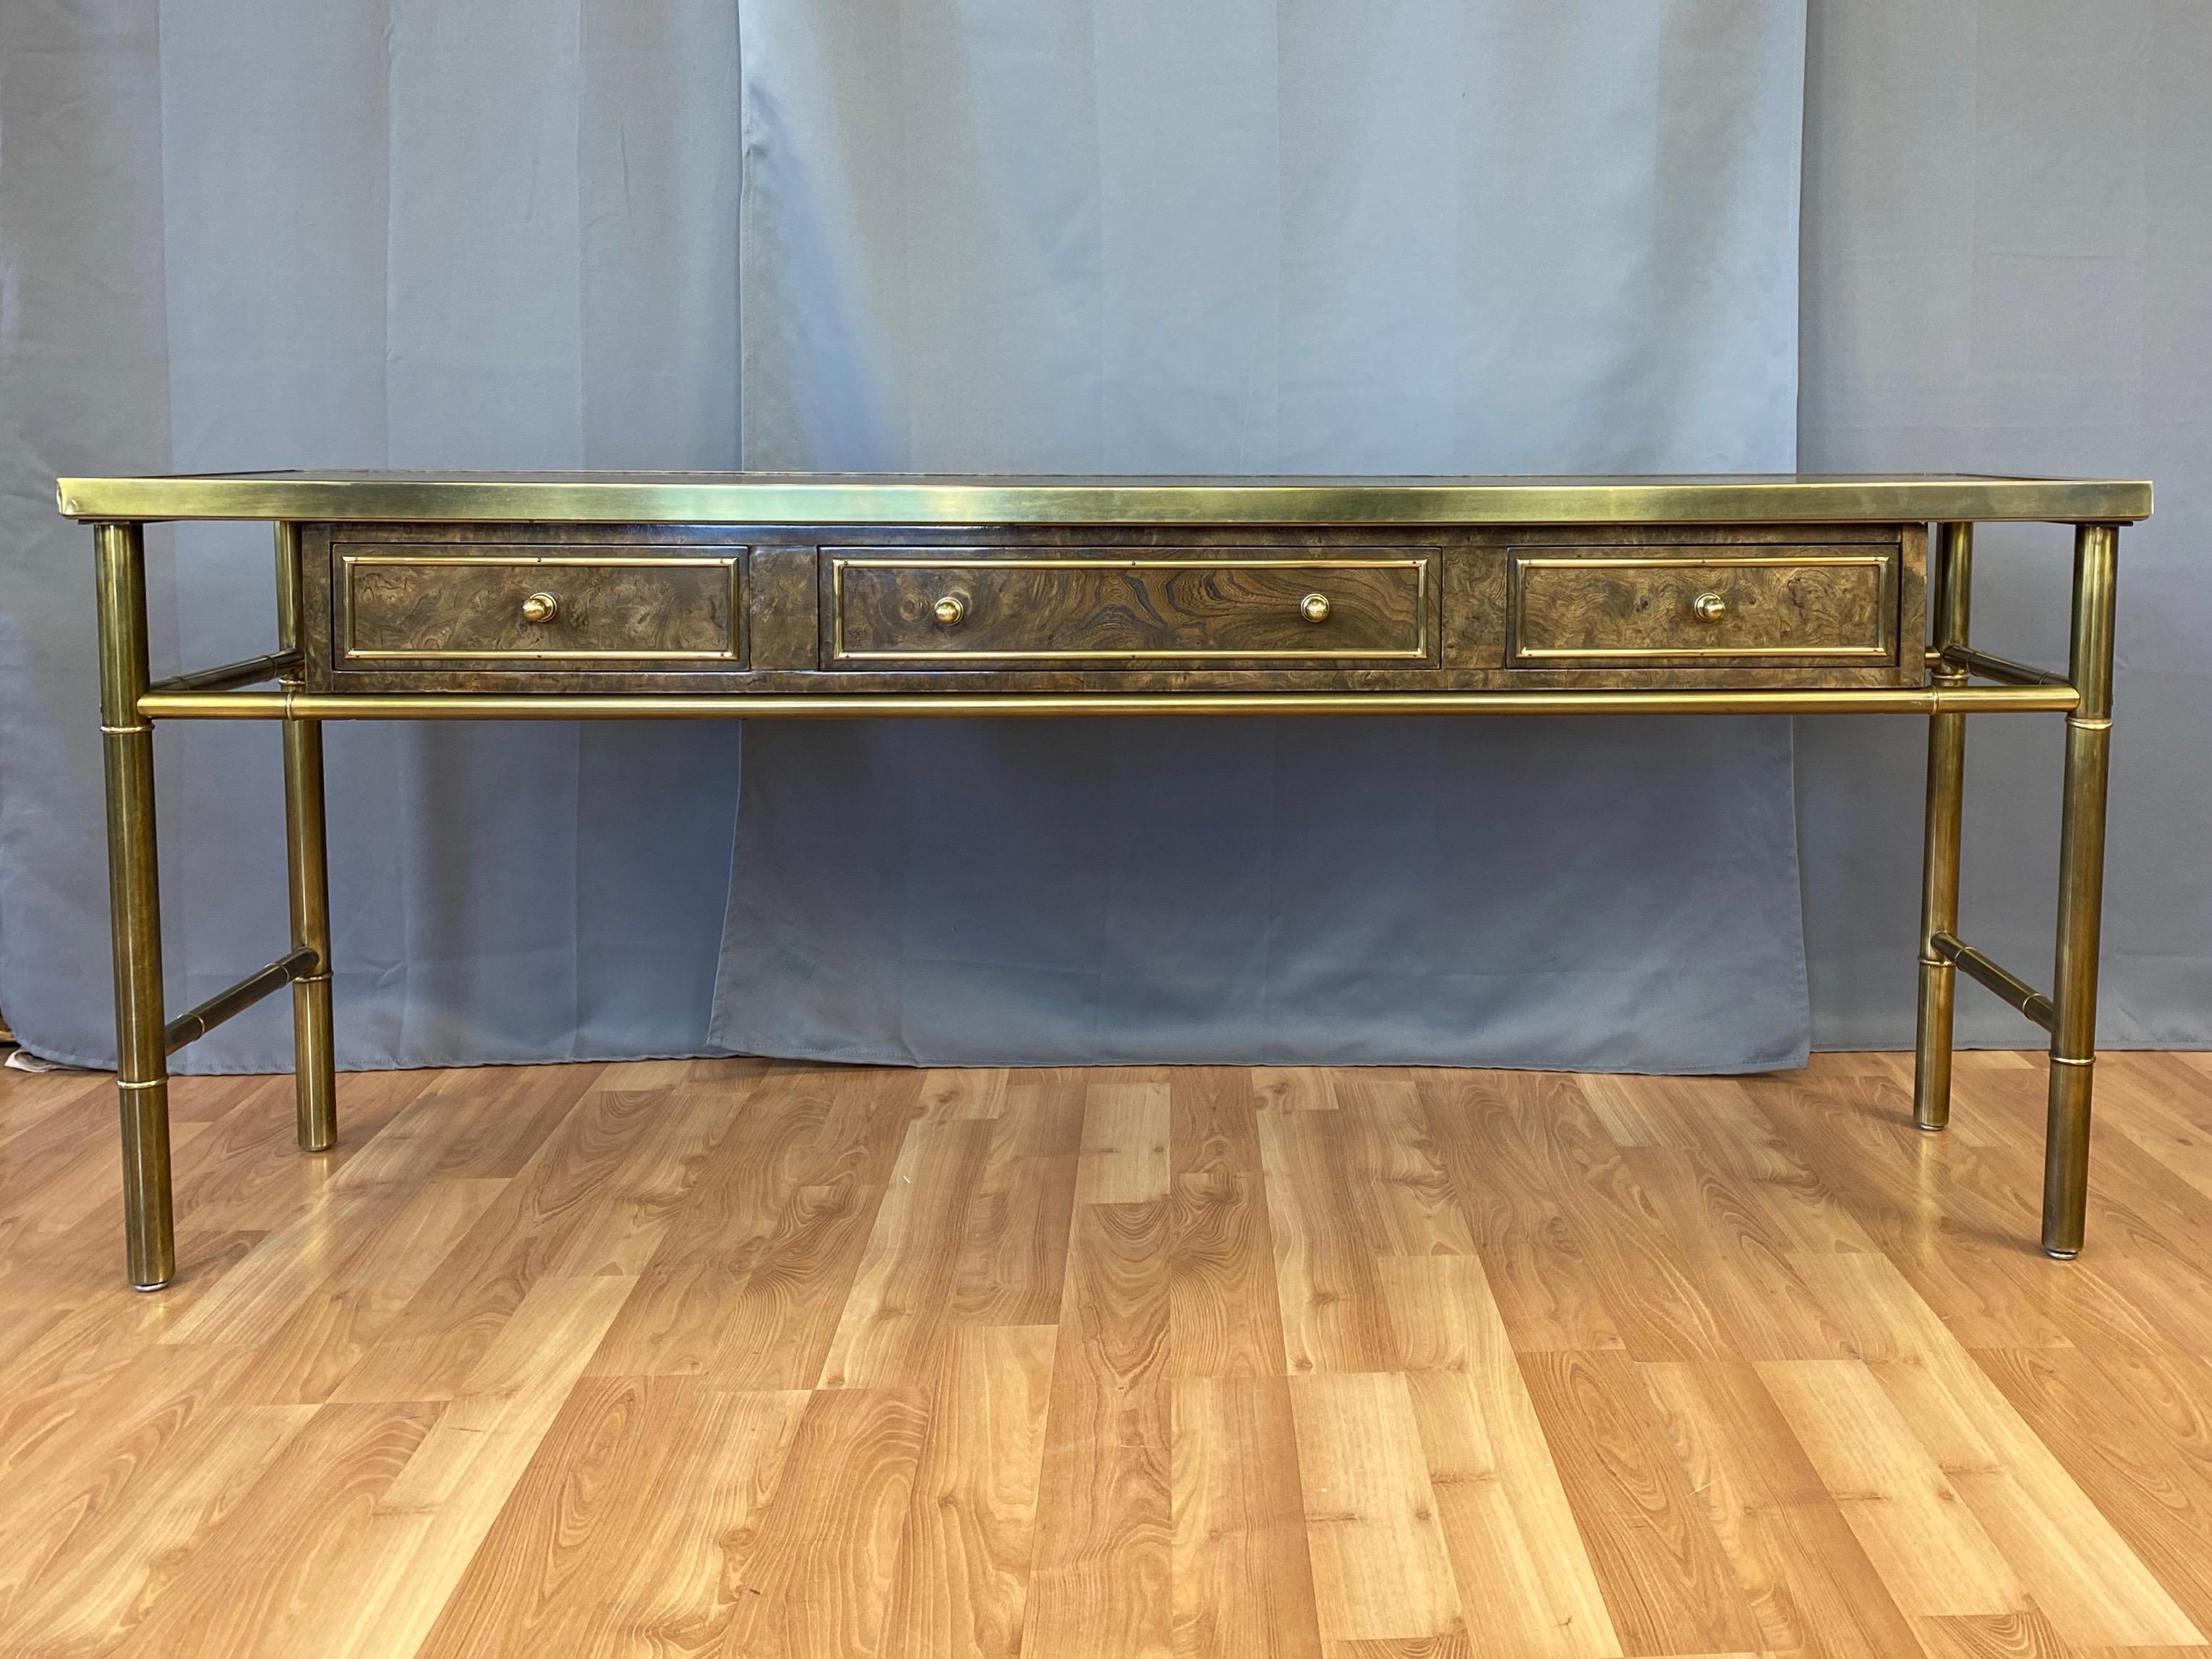 An exceptionally chic and uncommon 1970s Mastercraft brass and burl wood console or sofa table with drawers and acid-etched top.

Clean Italianate design with frame, trim, pulls, and stylized Chinoiserie legs in Mastercraft’s signature antiqued